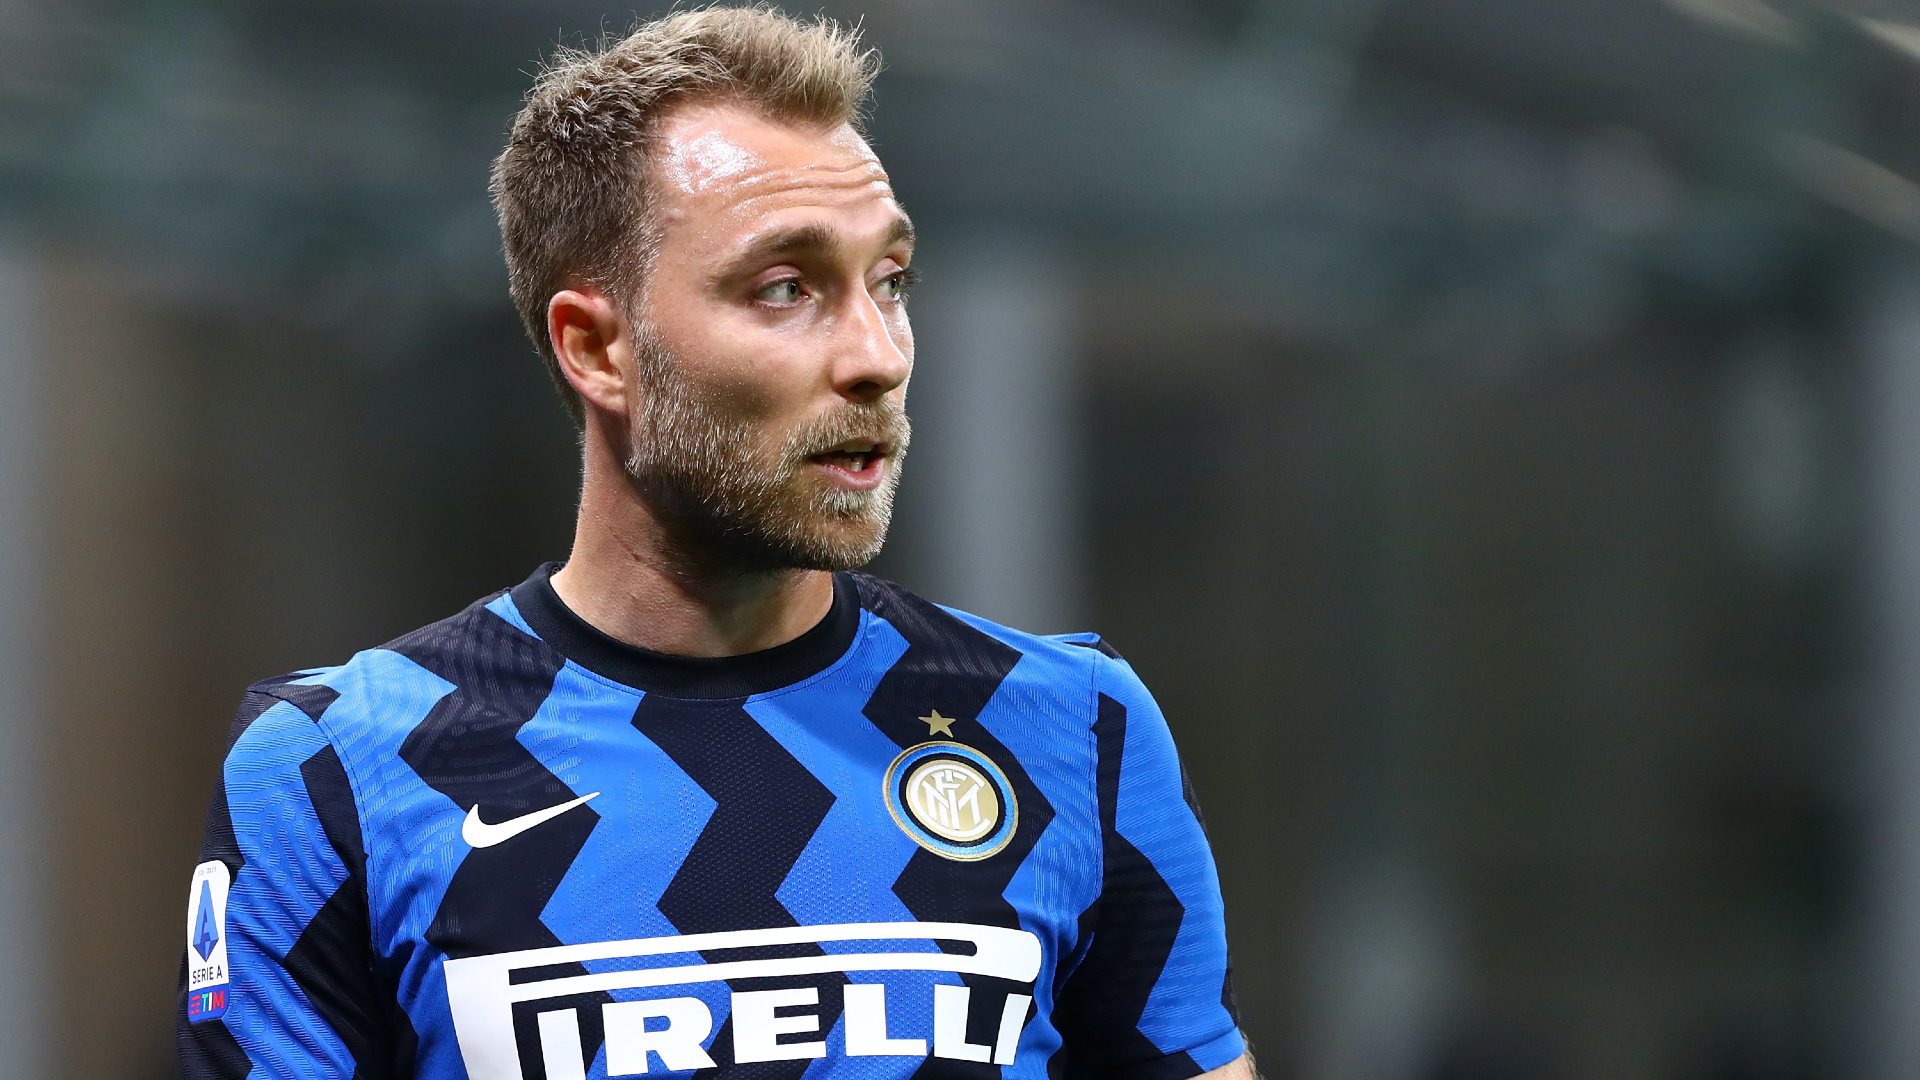 'Eriksen is a high-level player' - Inter midfielder thriving in new role at San Siro, says assistant coach Stellini